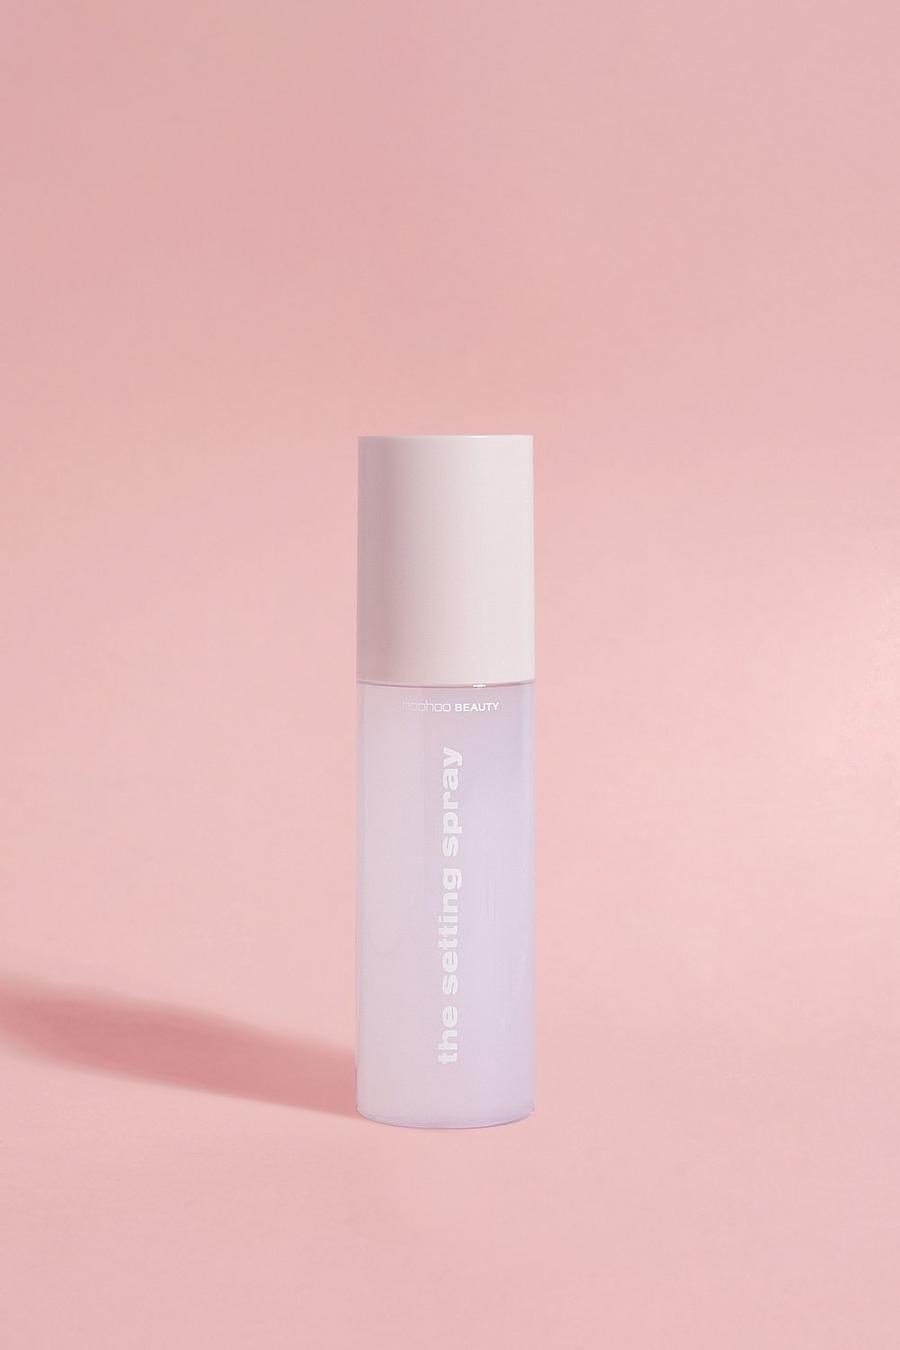 Boohoo Beauty - Mist fissante idratante effetto dewy, Clear image number 1